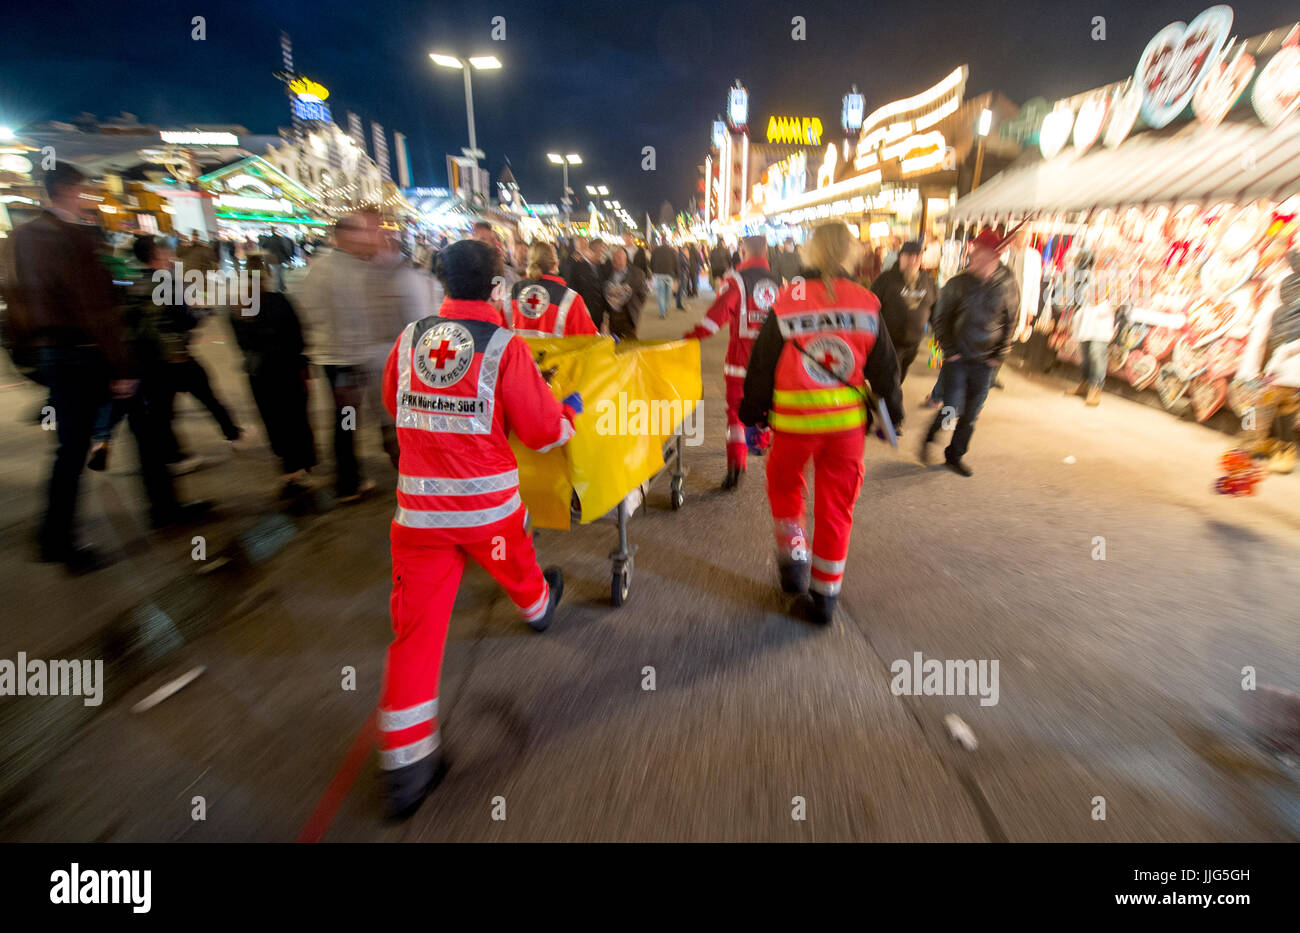 Paramedics of the German Red Cross push a stretcher to a location at the 182nd Oktoberfest in Munich, Germany, 23 September 2015. 8,000 patients were treated at the first-aid station run by the German Red Cross last year, with 680 of them suffering from alcohol poisoning. The world's largest beer festival which will run until 04 October 2015 is expected to attract some six million visitors from all over the world this year. Photo: MATTHIAS BALK/dpa | usage worldwide Stock Photo